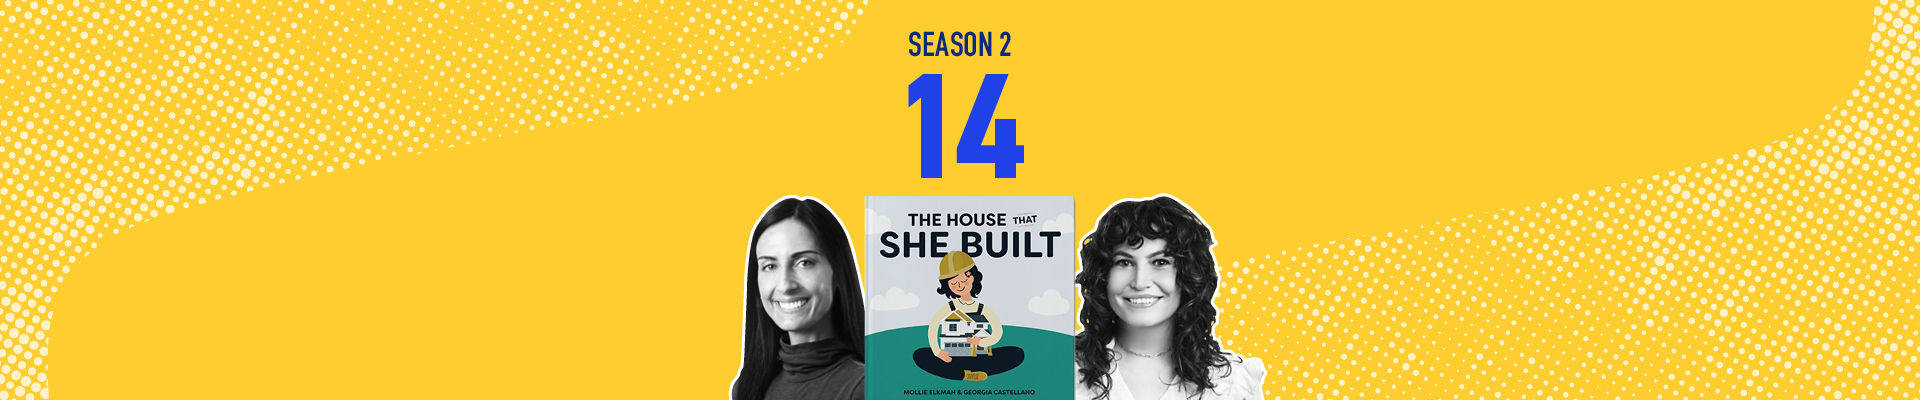 The House That SHE Built children's book